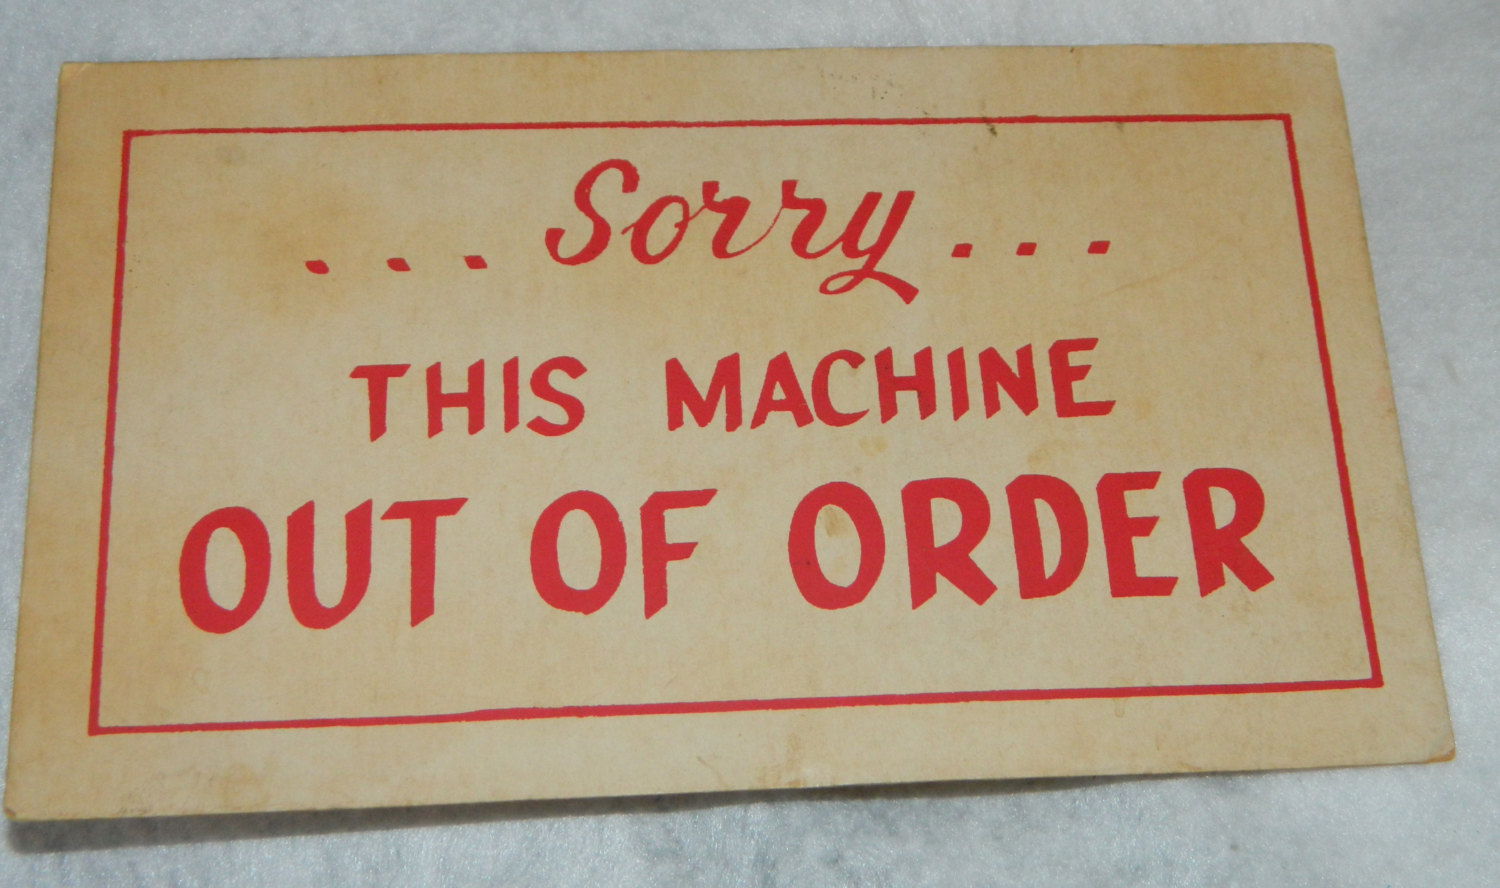 Order signs. Out of order табличка. Sorry out of order. Sorry out of order sign. Out of order картинки со смыслом.